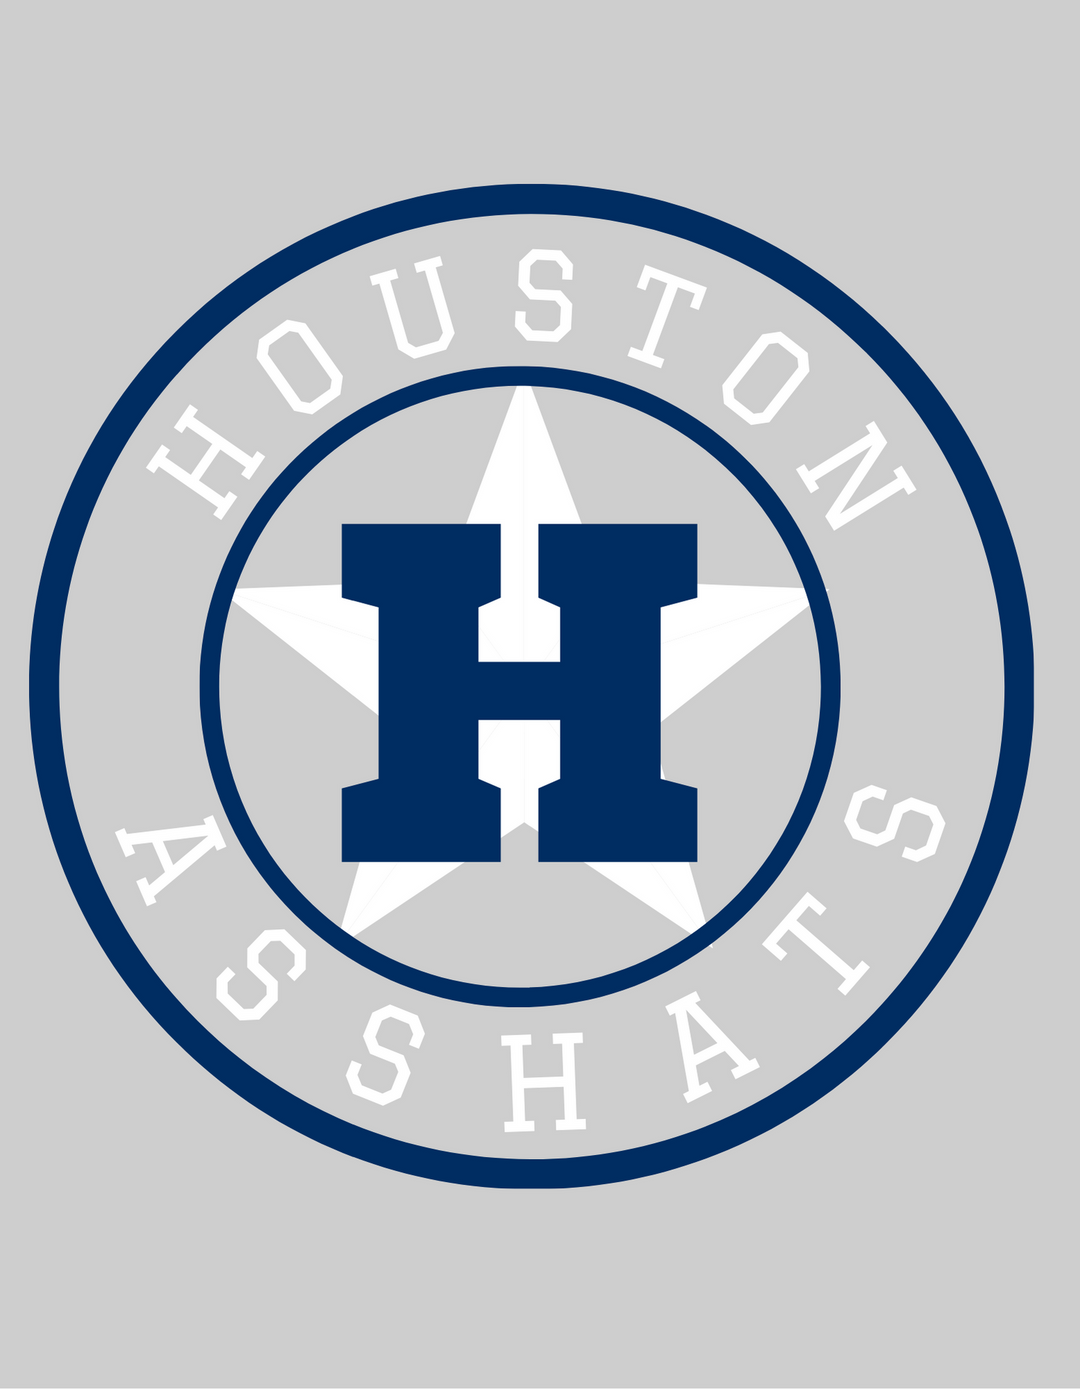 Logo with a star and letter H on a Houston Asshats #14 Ben Derhover Tee, symbolizing comfort and durability. Made of 100% ring-spun cotton, featuring a relaxed fit and double-needle stitching for lasting quality.